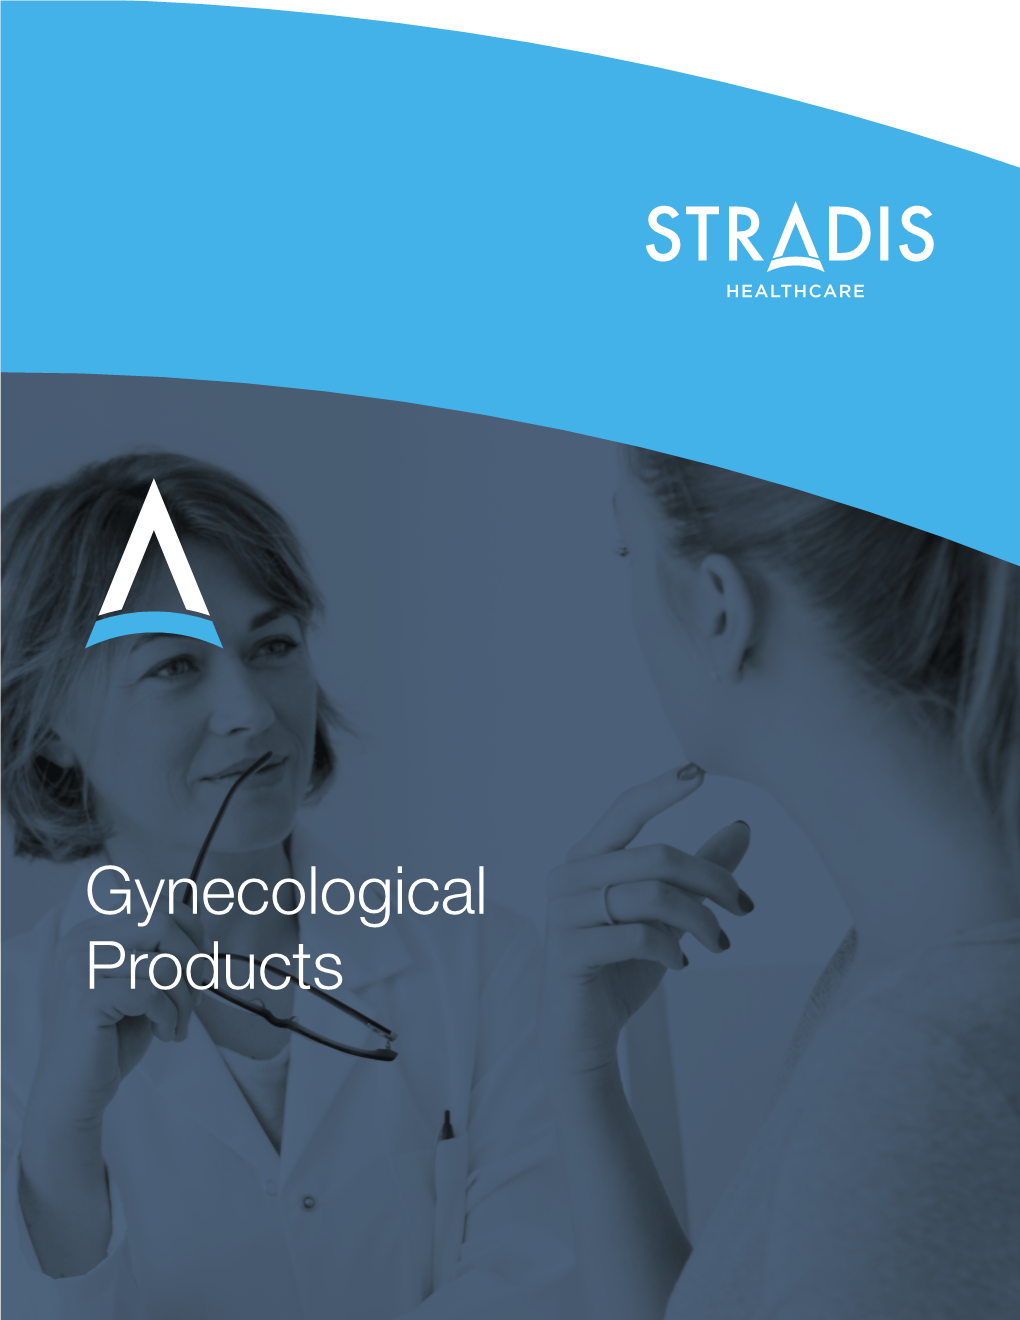 Gynecological Products the Stradis Healthcare Mypack Provides Our Clients a Wide Variety of Gynecological Packs Customized for Both You and Your Patient’S Needs